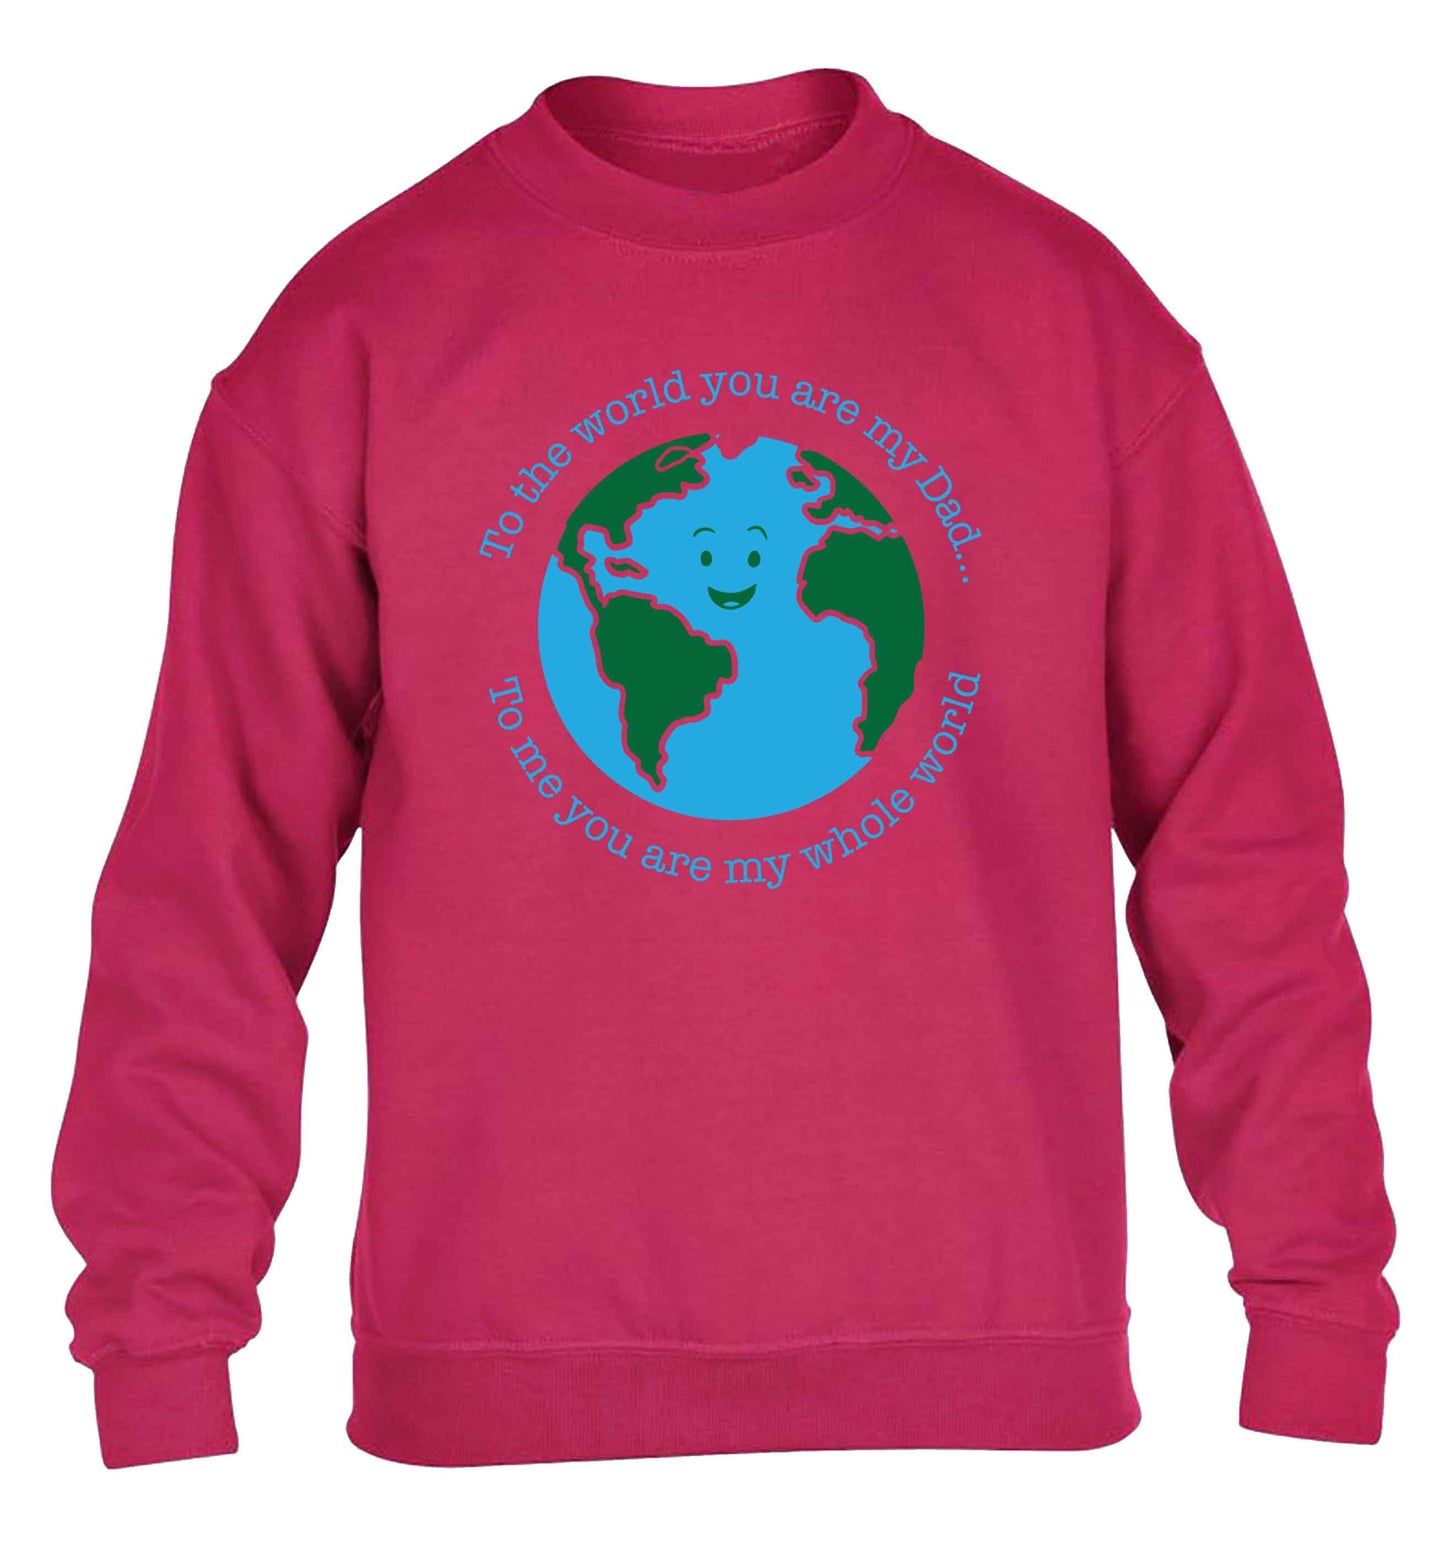 To the world you are my dad, to me you are my whole world children's pink sweater 12-13 Years